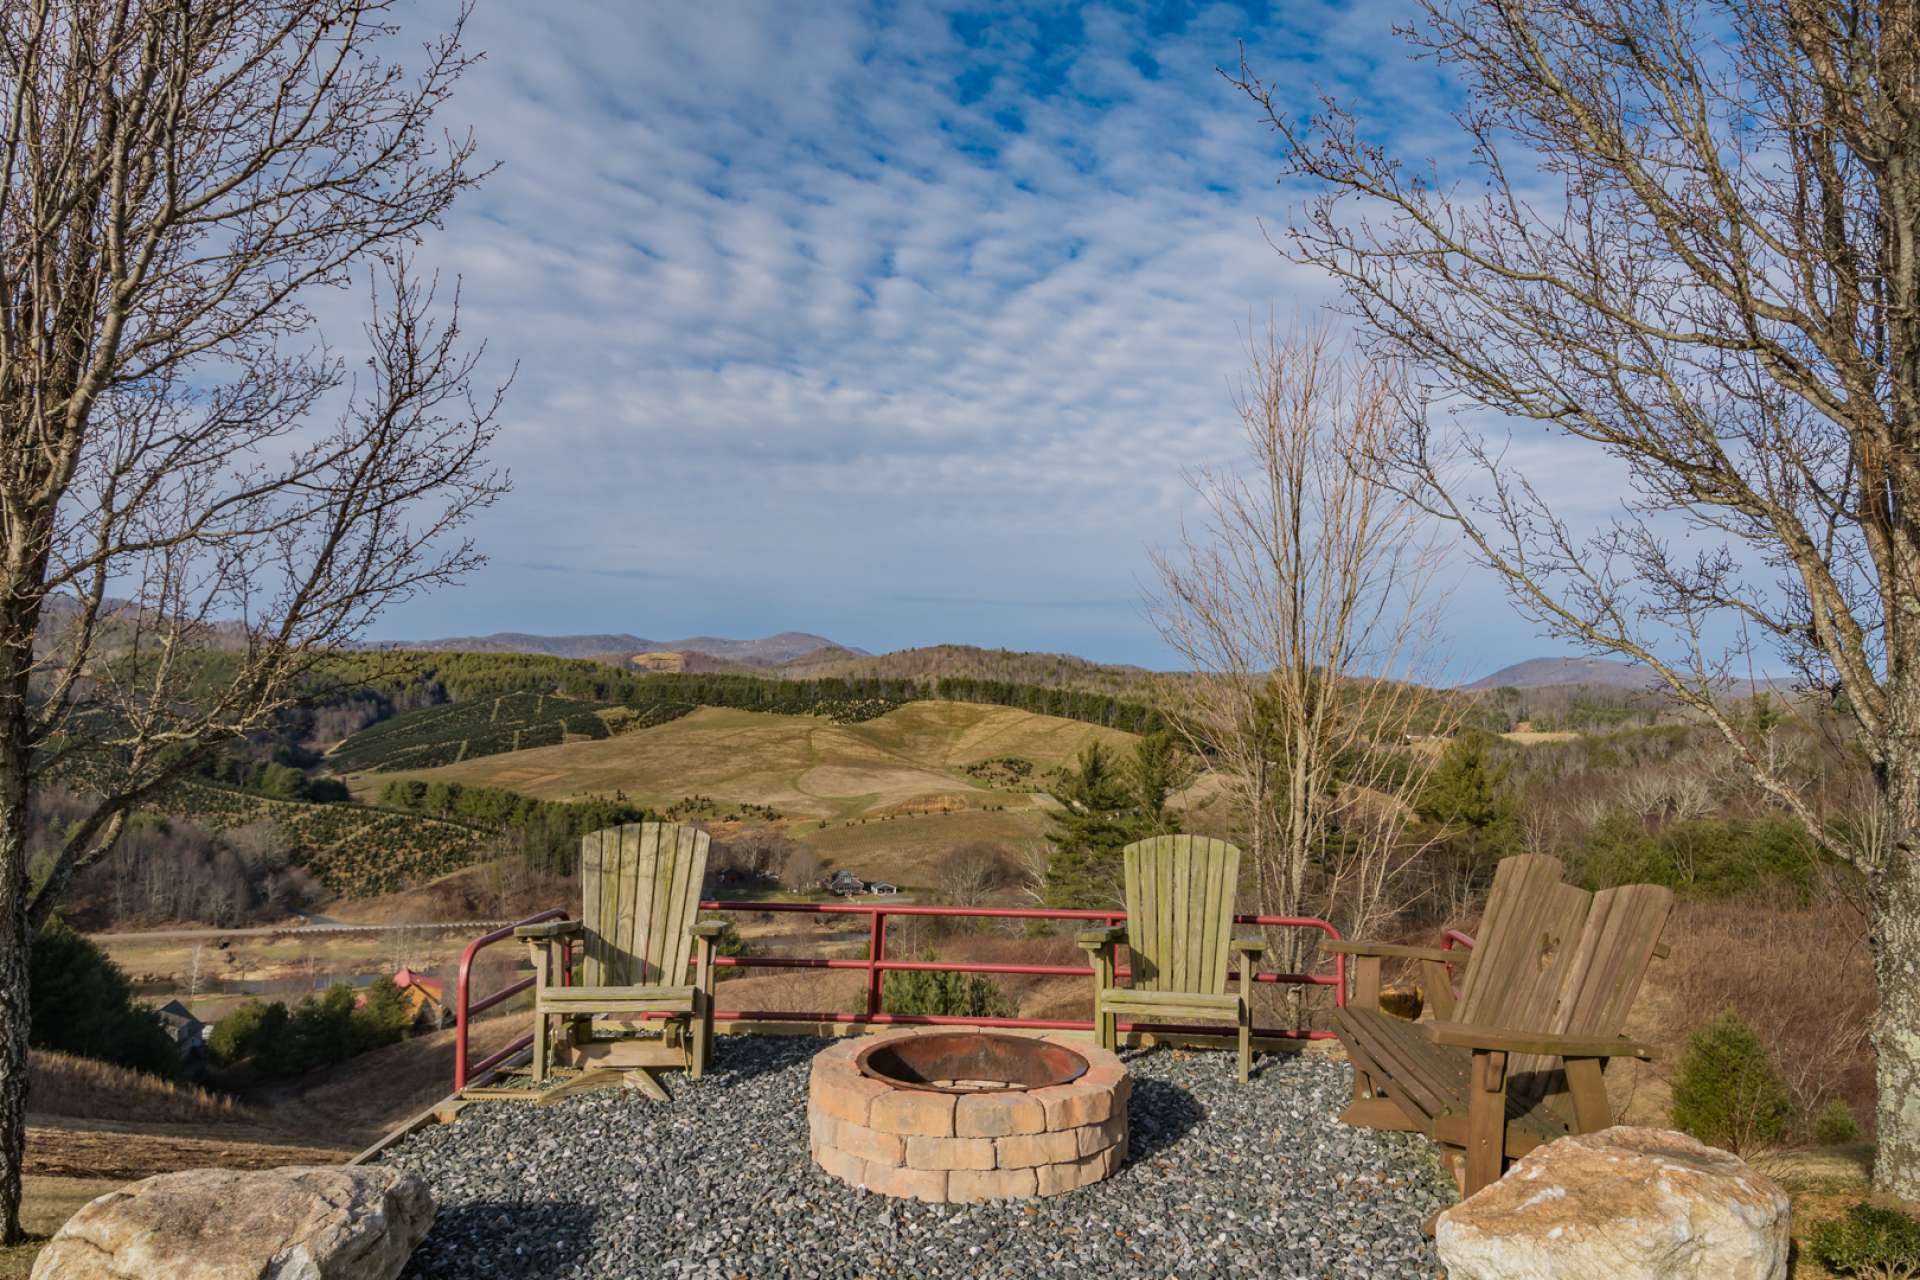 Another great place to enjoy the company of friends and family is around the firepit. You will enjoy sharing stories and memories of past times while making new memories here in the High Country.